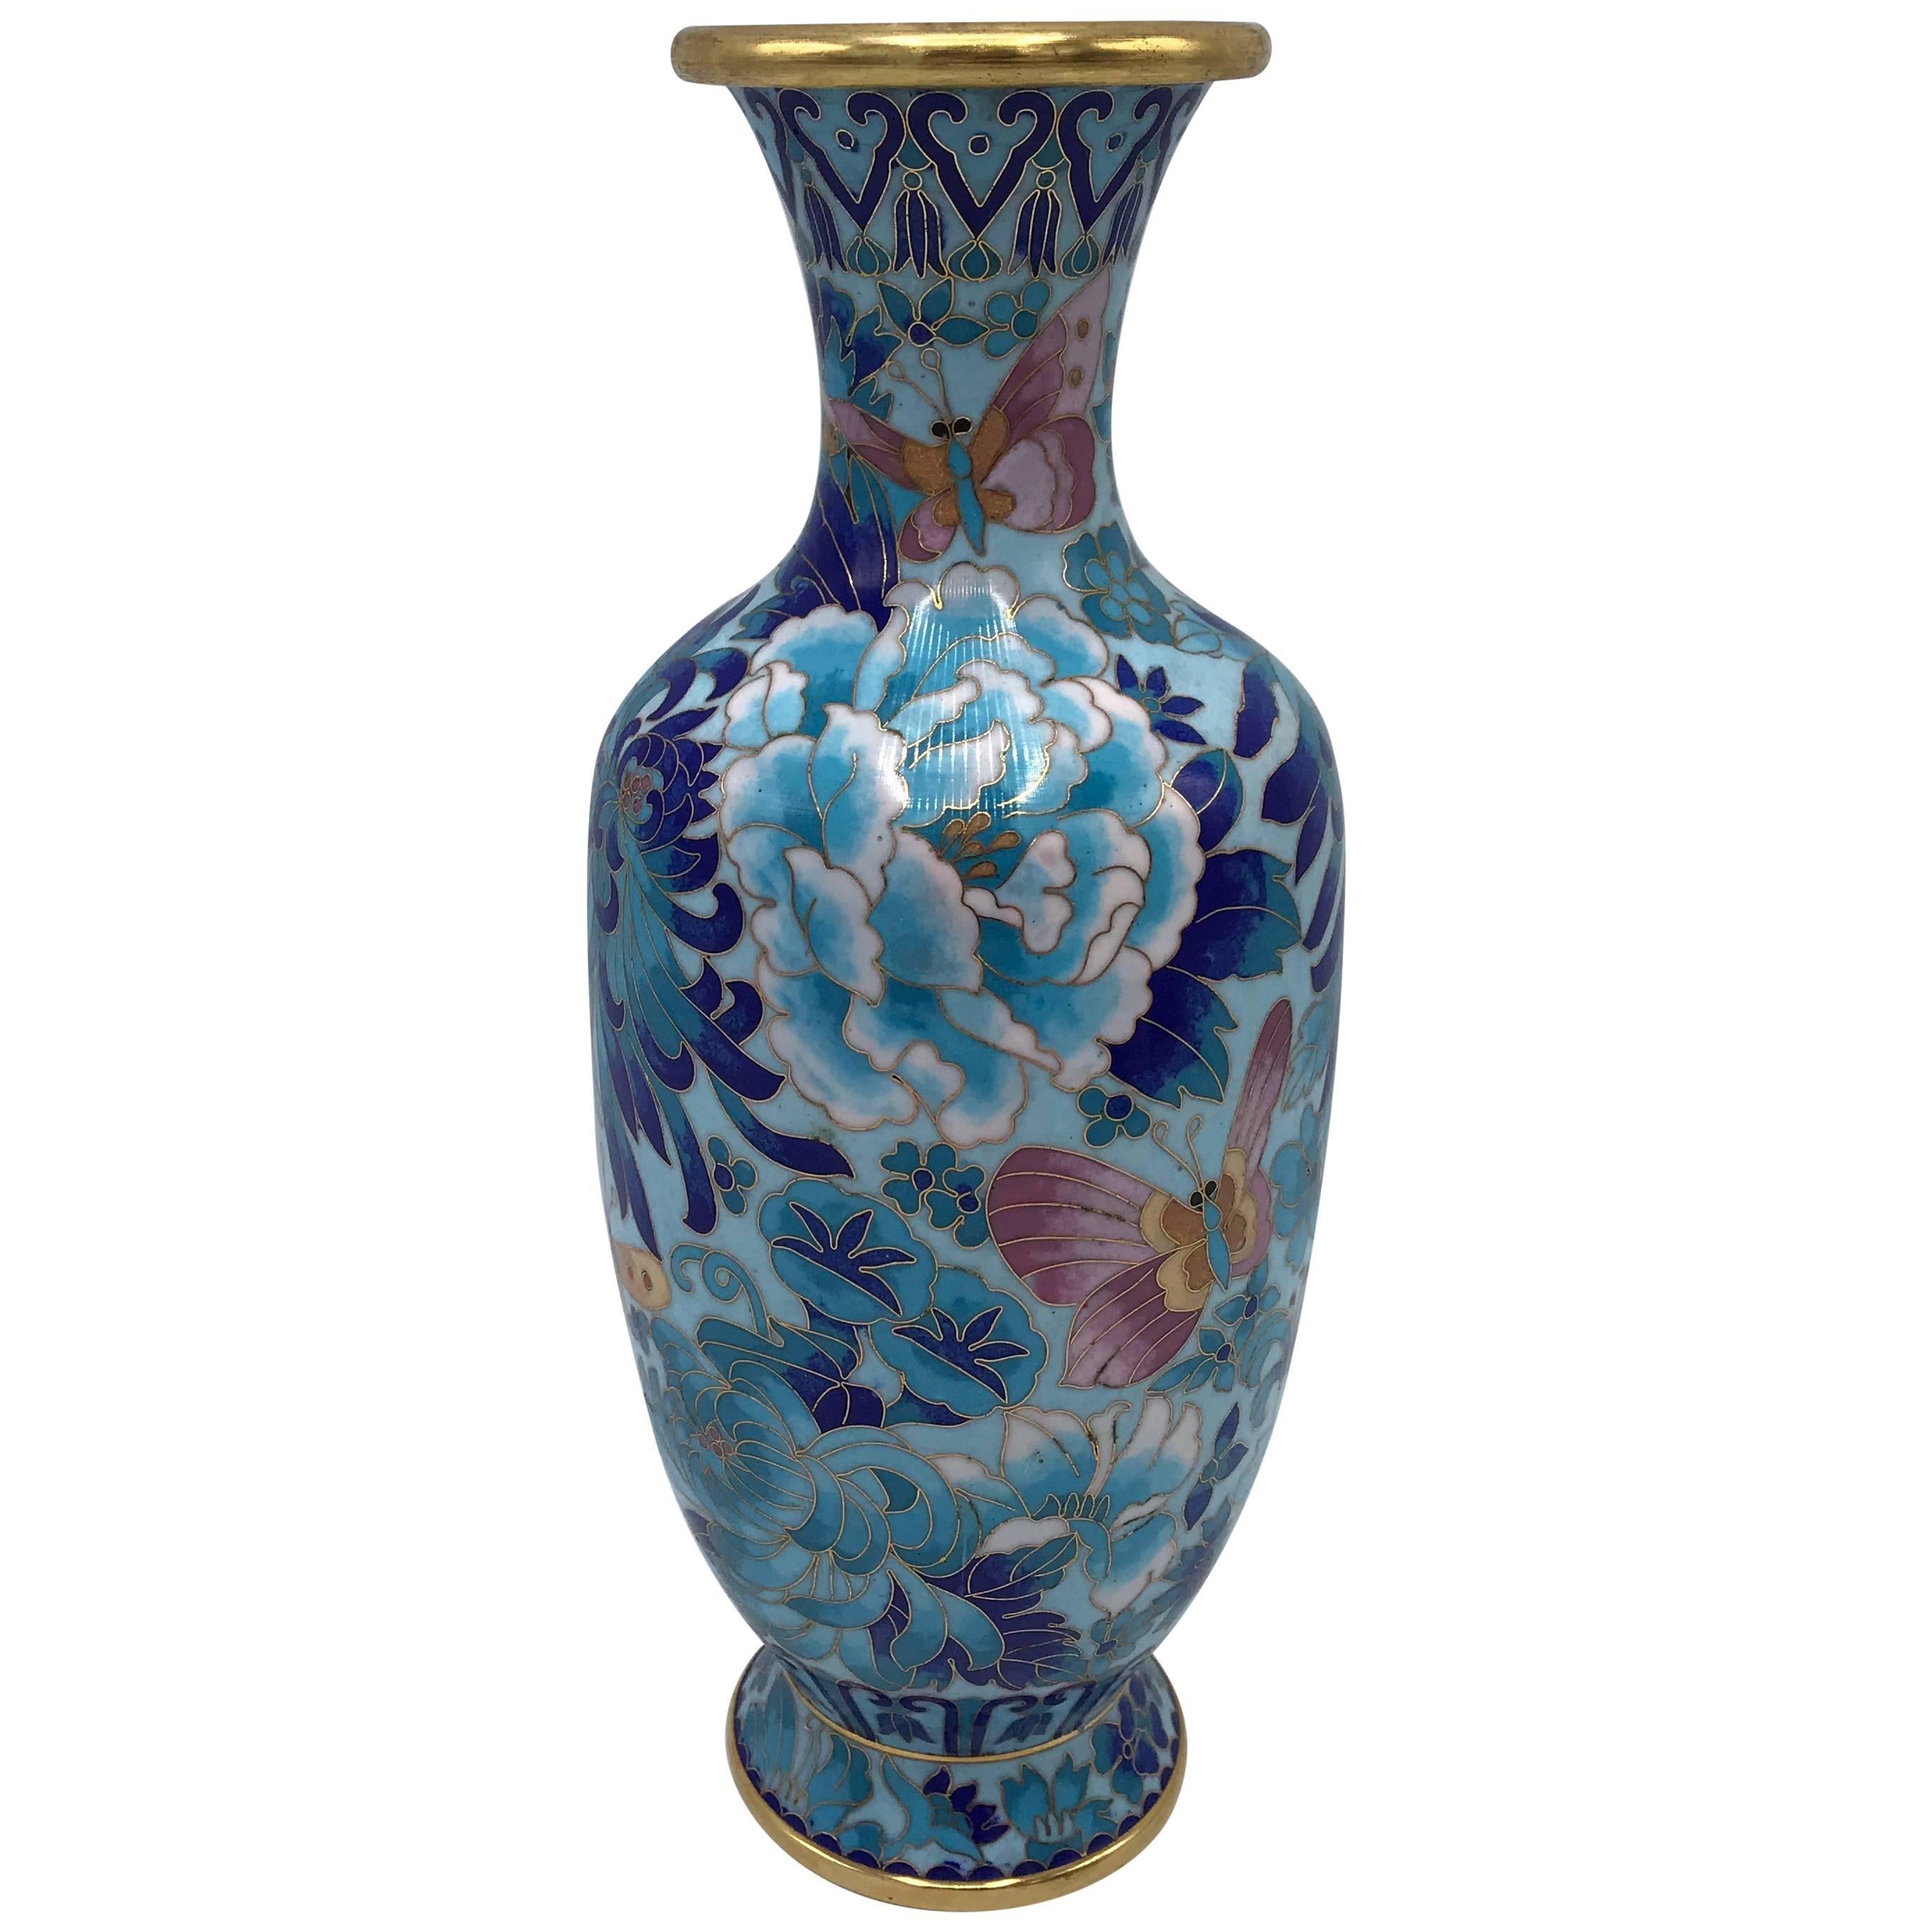 1960s Blue Cloisonné Vase with Peony and Floral Motif